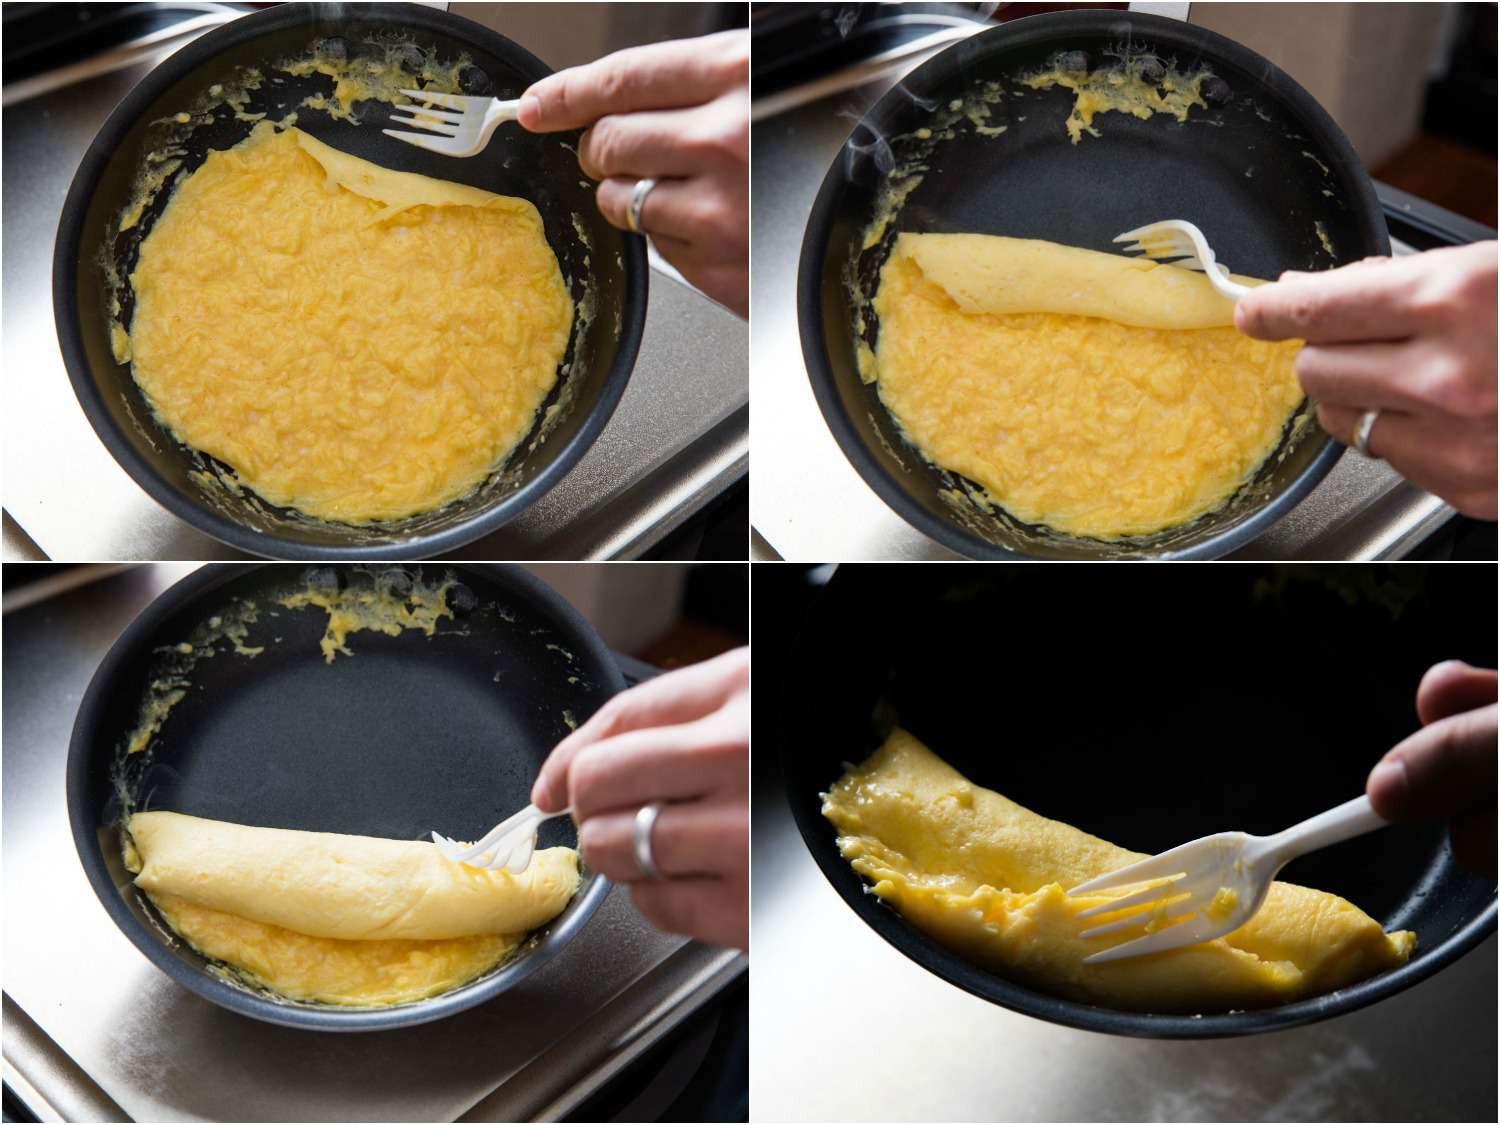 Collage of making a French omelette in a nonstick pan: using a plastic fork to roll the edge of the omelette in on itself and form an oblong shape